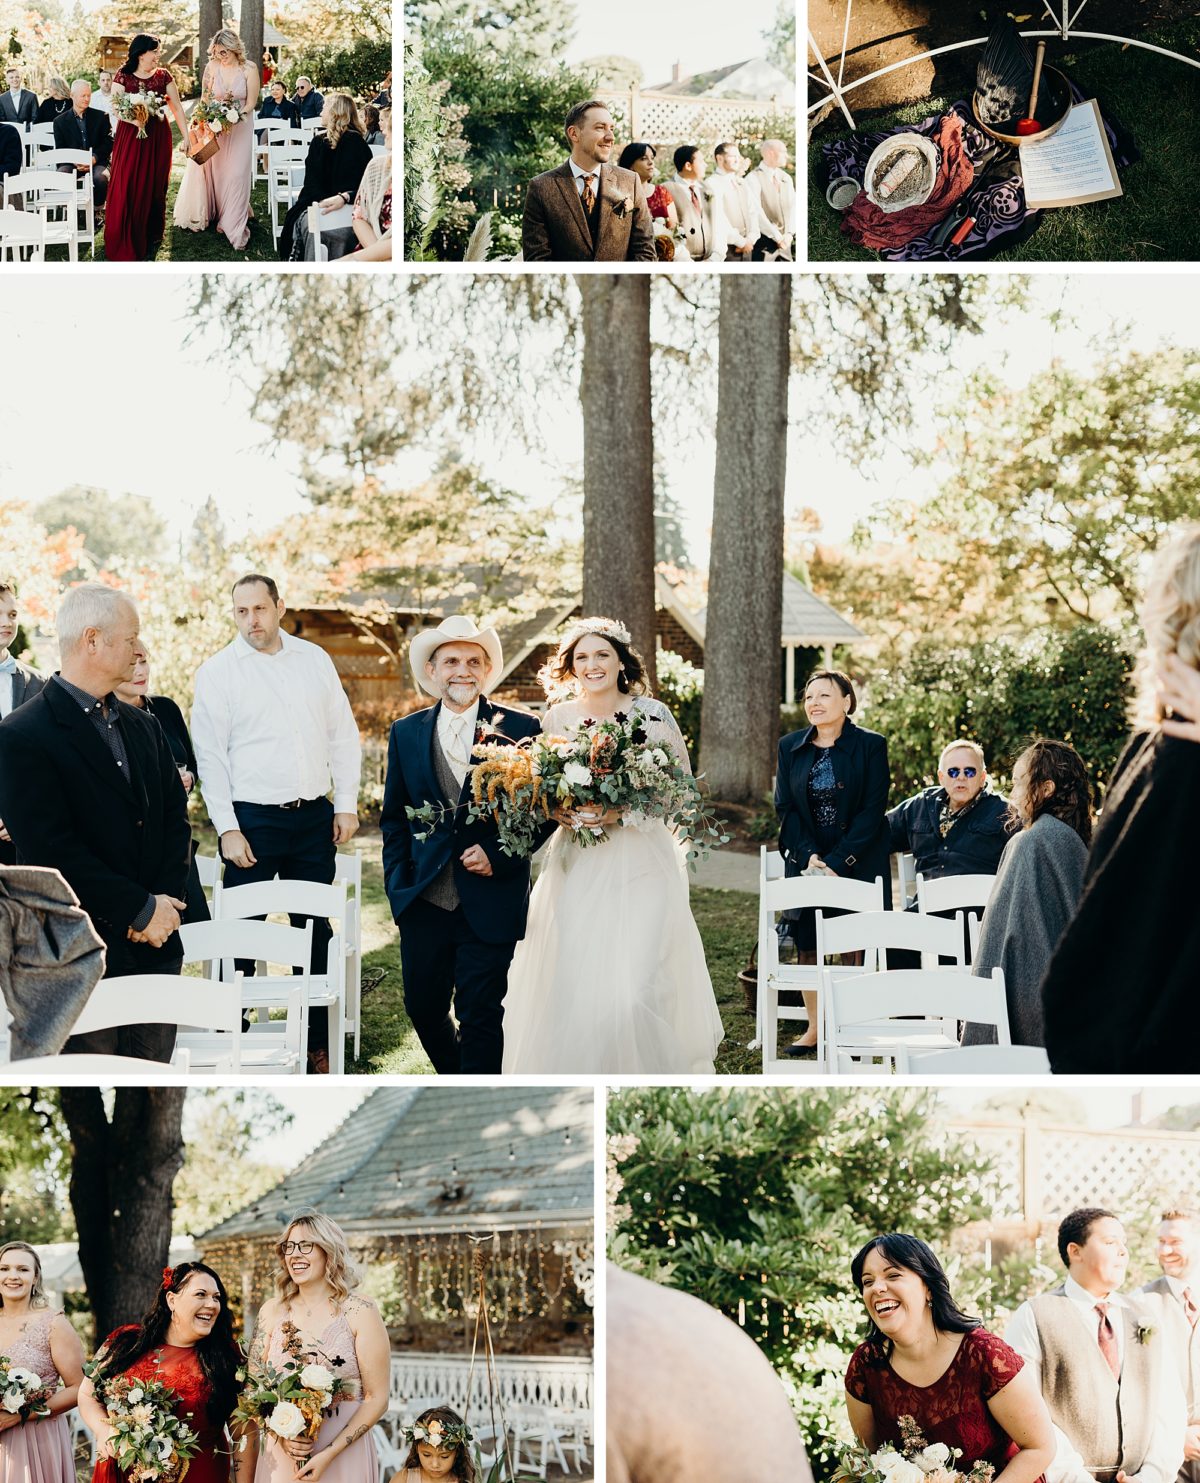 An outdoor wedding ceremony in Portland, Oregon. Photographed by Pacific Northwest Wedding Photographer, Briana Morrison